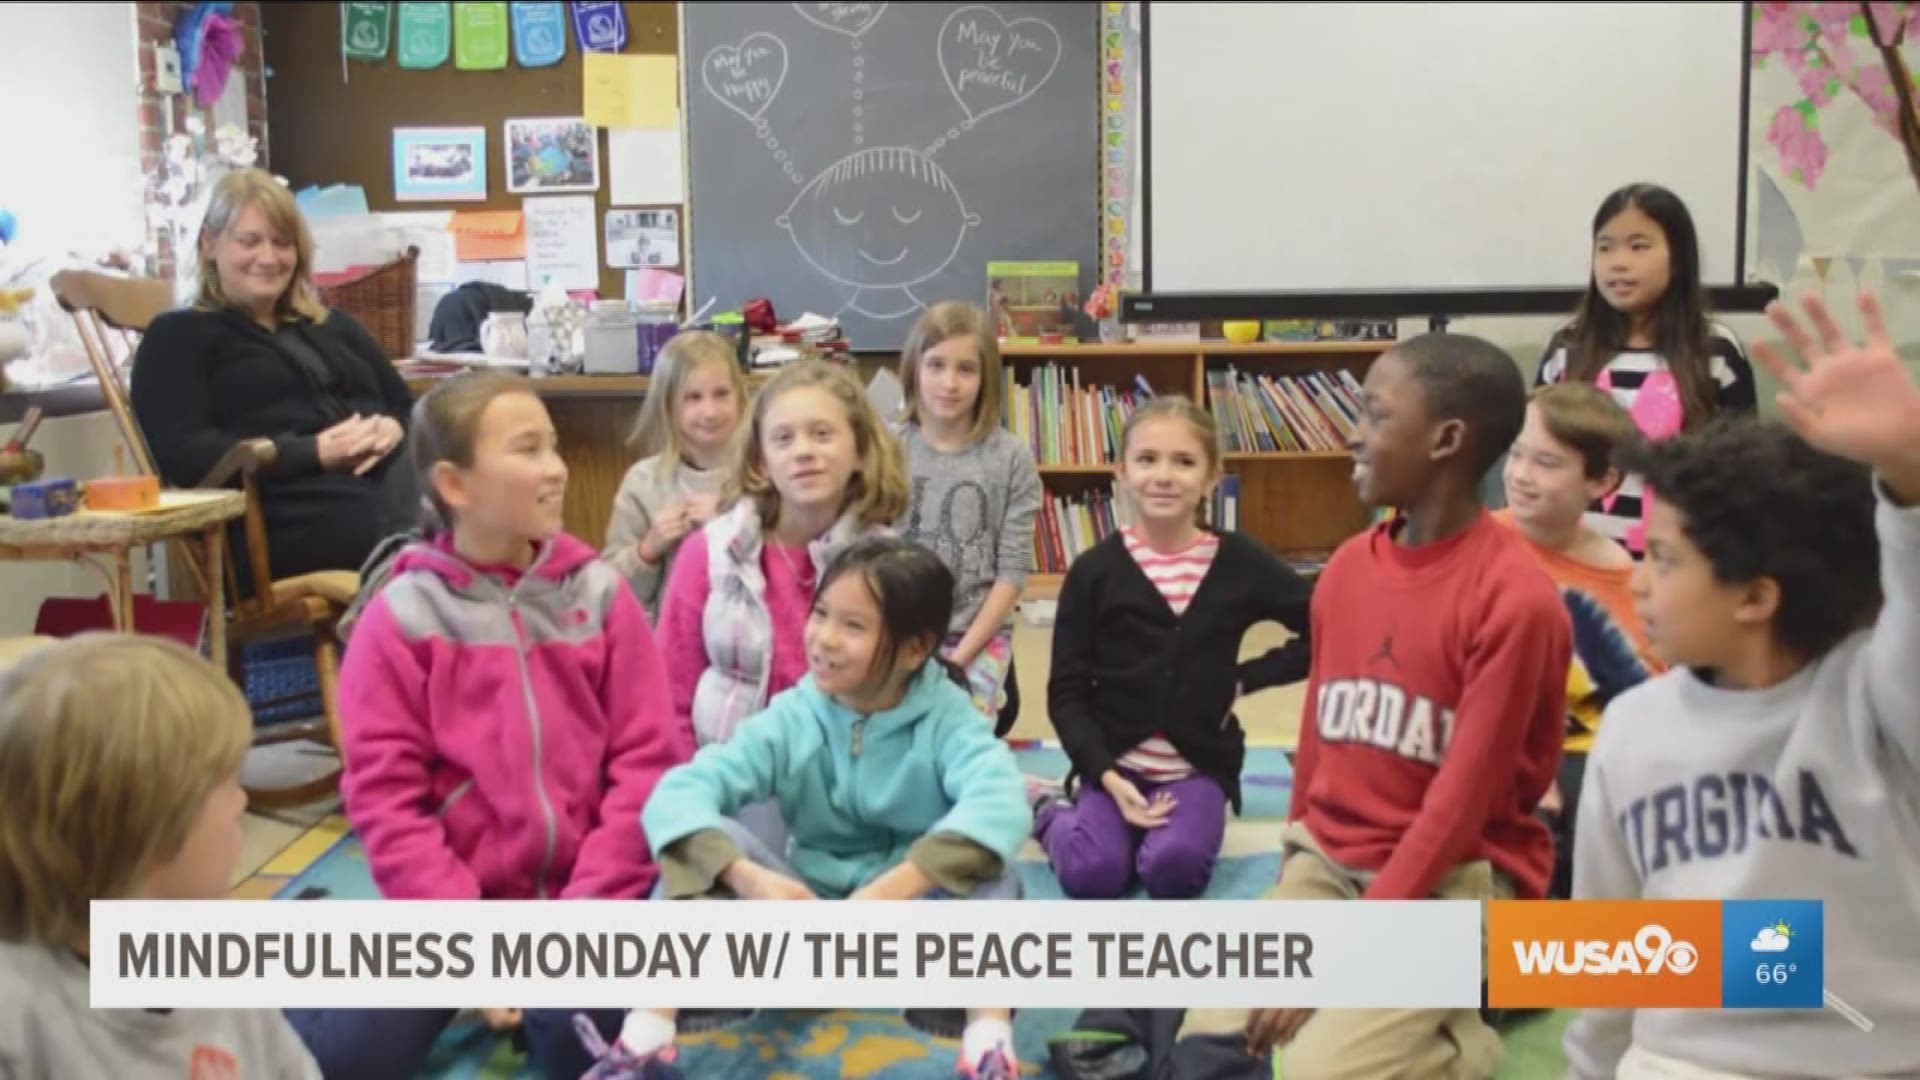 School of any level can be stressful, but with the mindfulness program at Lafayette Elementary School, students are using simple skills for peace and productivity to help build social and emotional skills. You can watch NEA Foundation's Symposium "Keeping the Promise of Public Education" online, Friday, Oct. 5 beginning at 2:30 p.m. EDT.